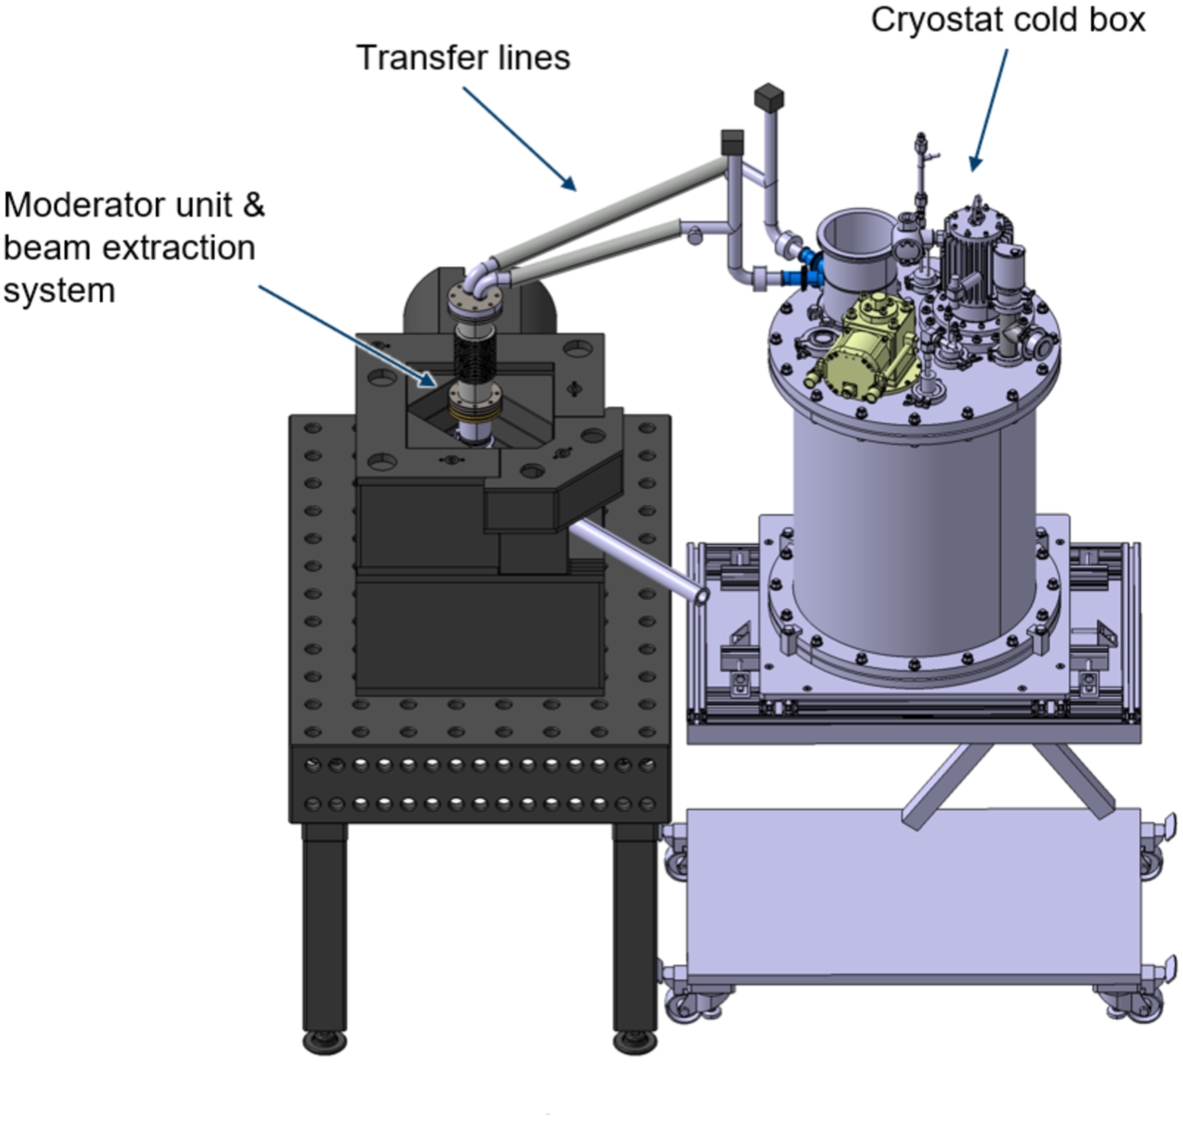 Moderator system with cryostat cold box.